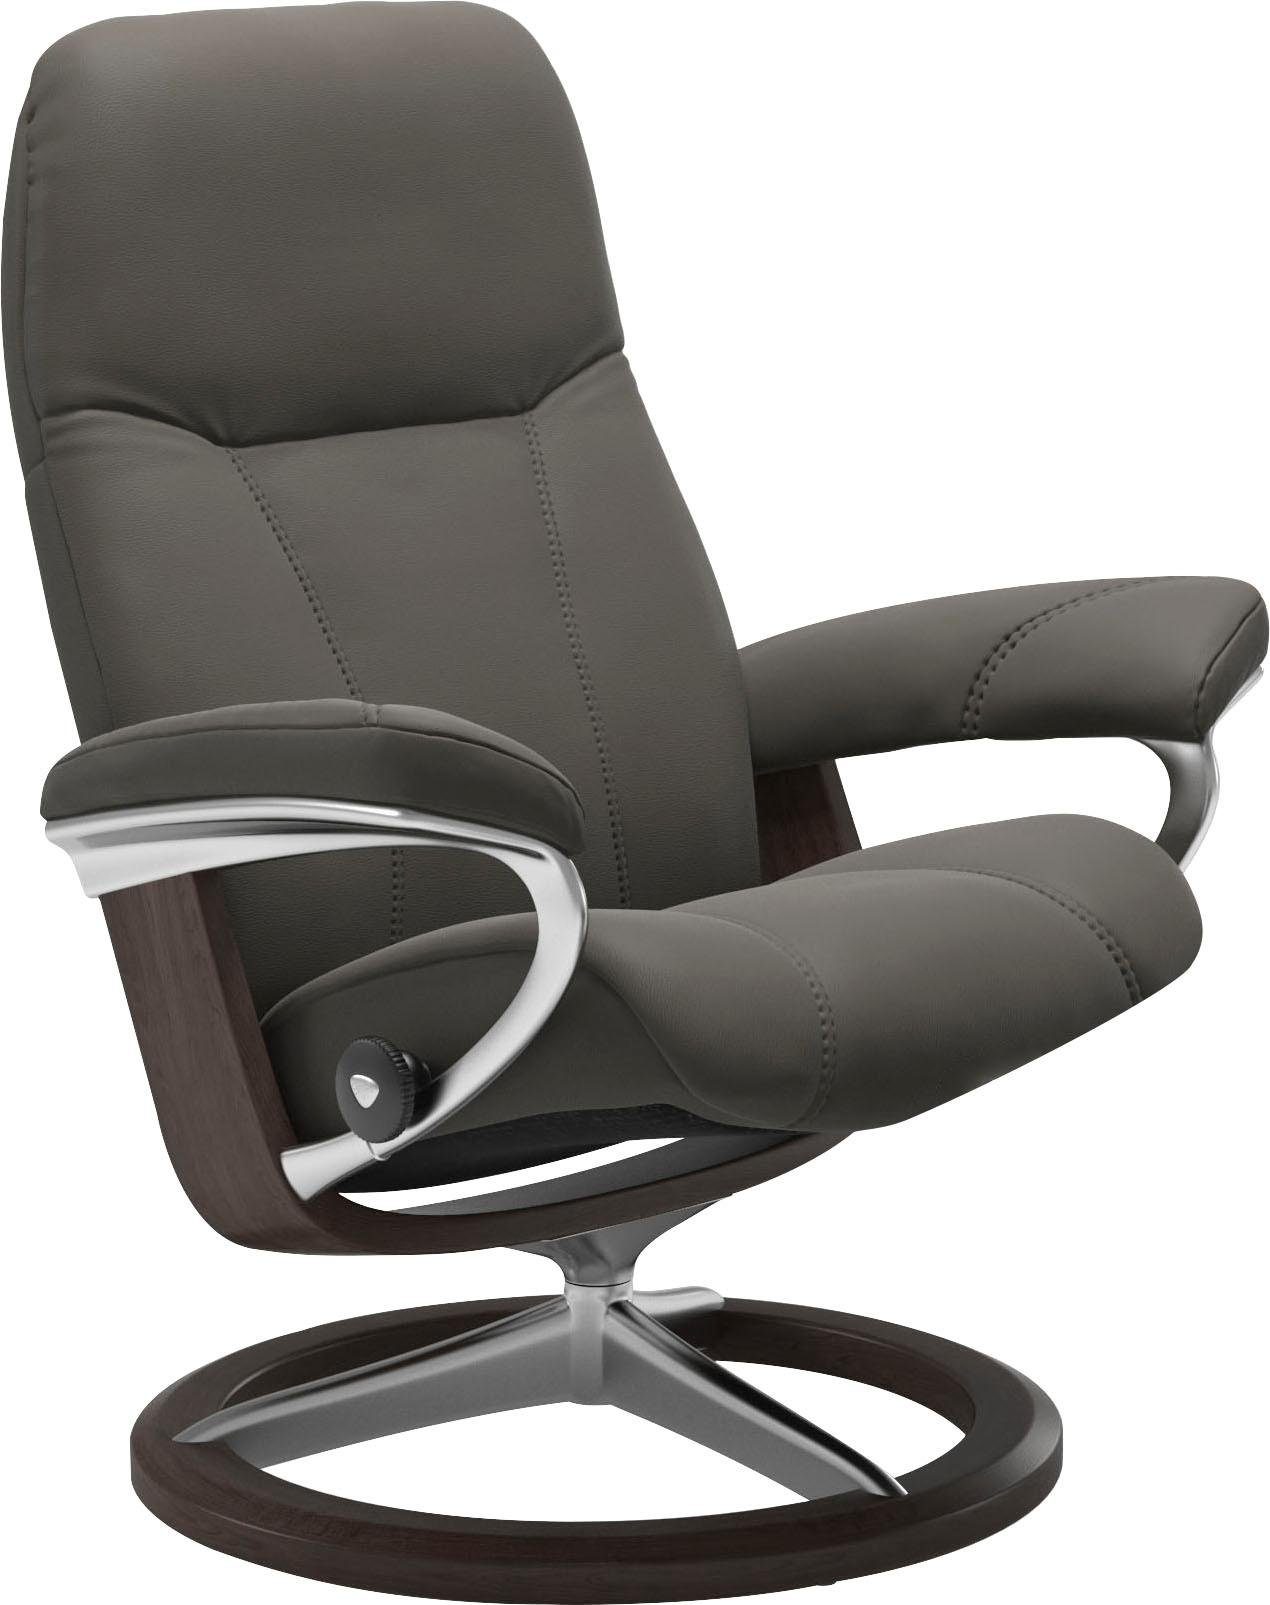 Stressless® Relaxsessel mit Base, Consul, Wenge L, Größe Signature Gestell